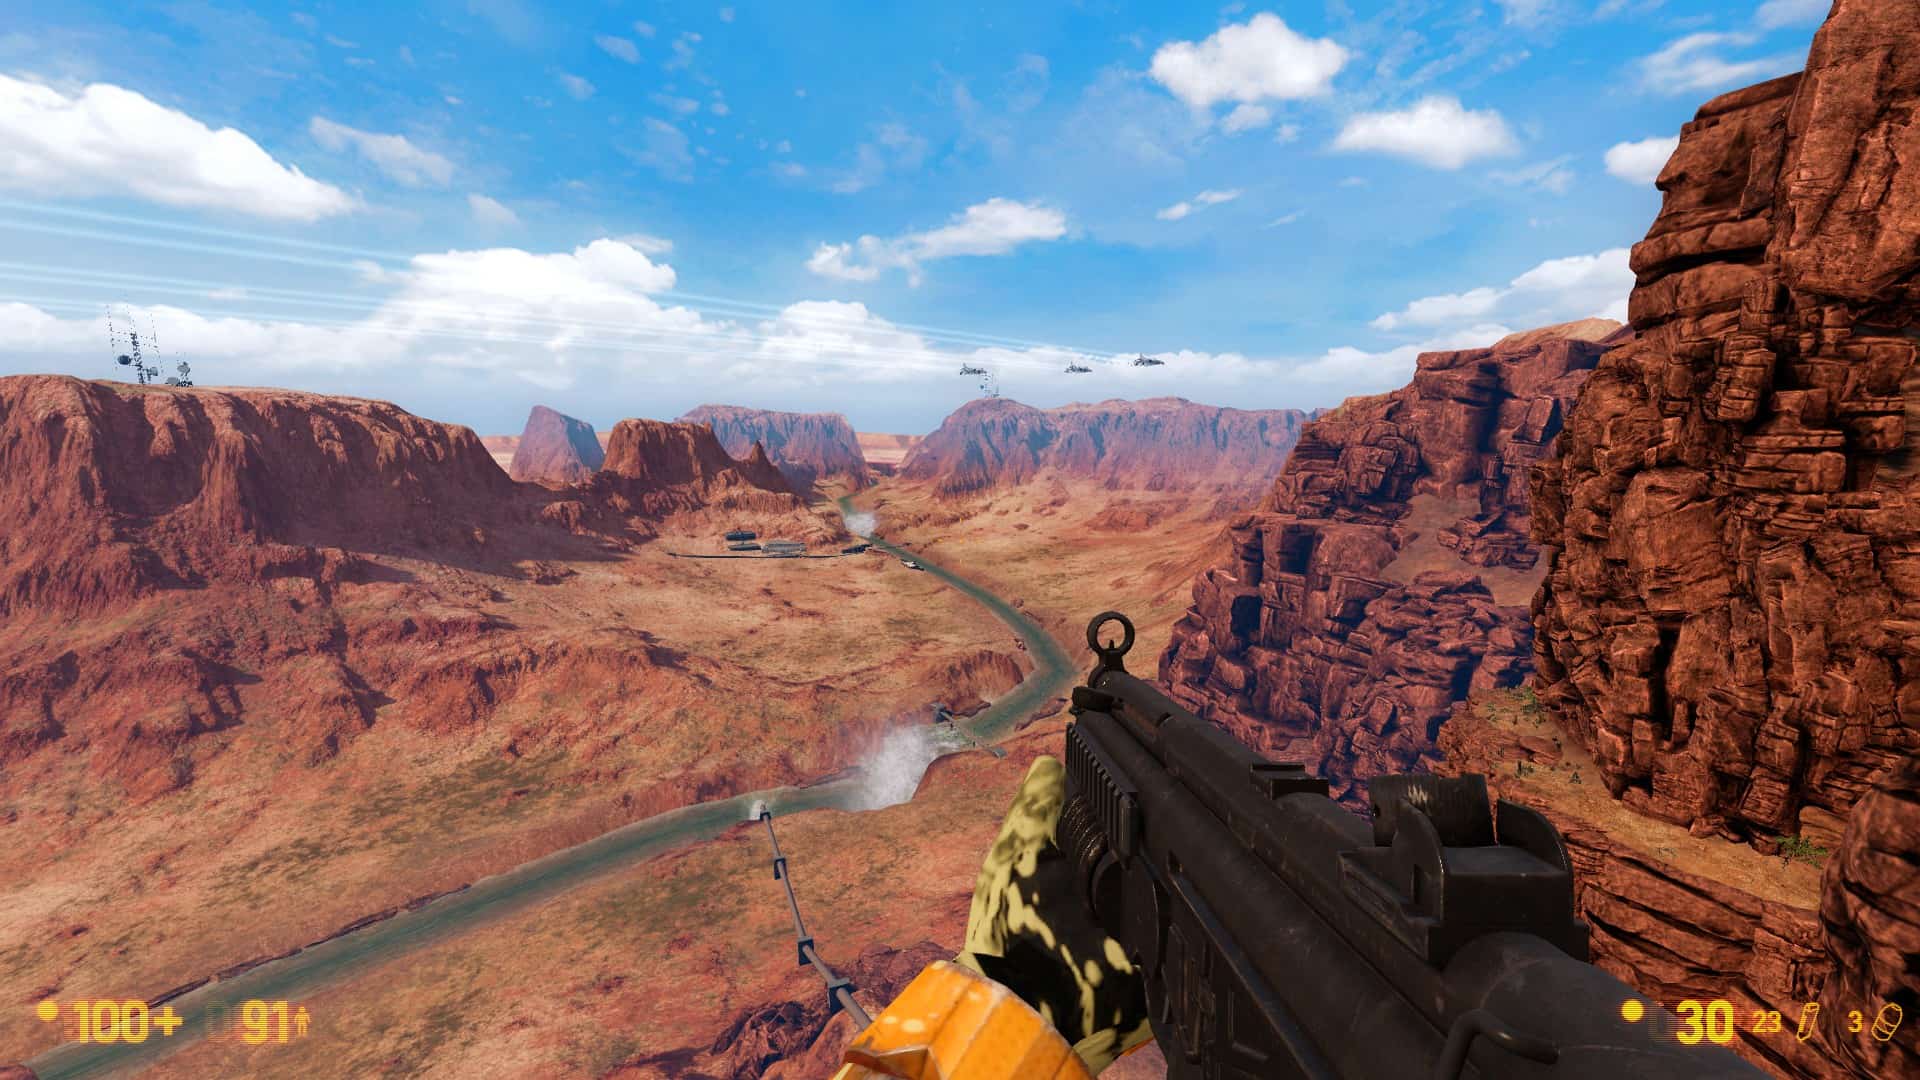 A screenshot from Black Mesa. The player, as Gordon Freeman, stares at the New Mexico vista as seen from the cliffs behind the Black Mesa research facility.